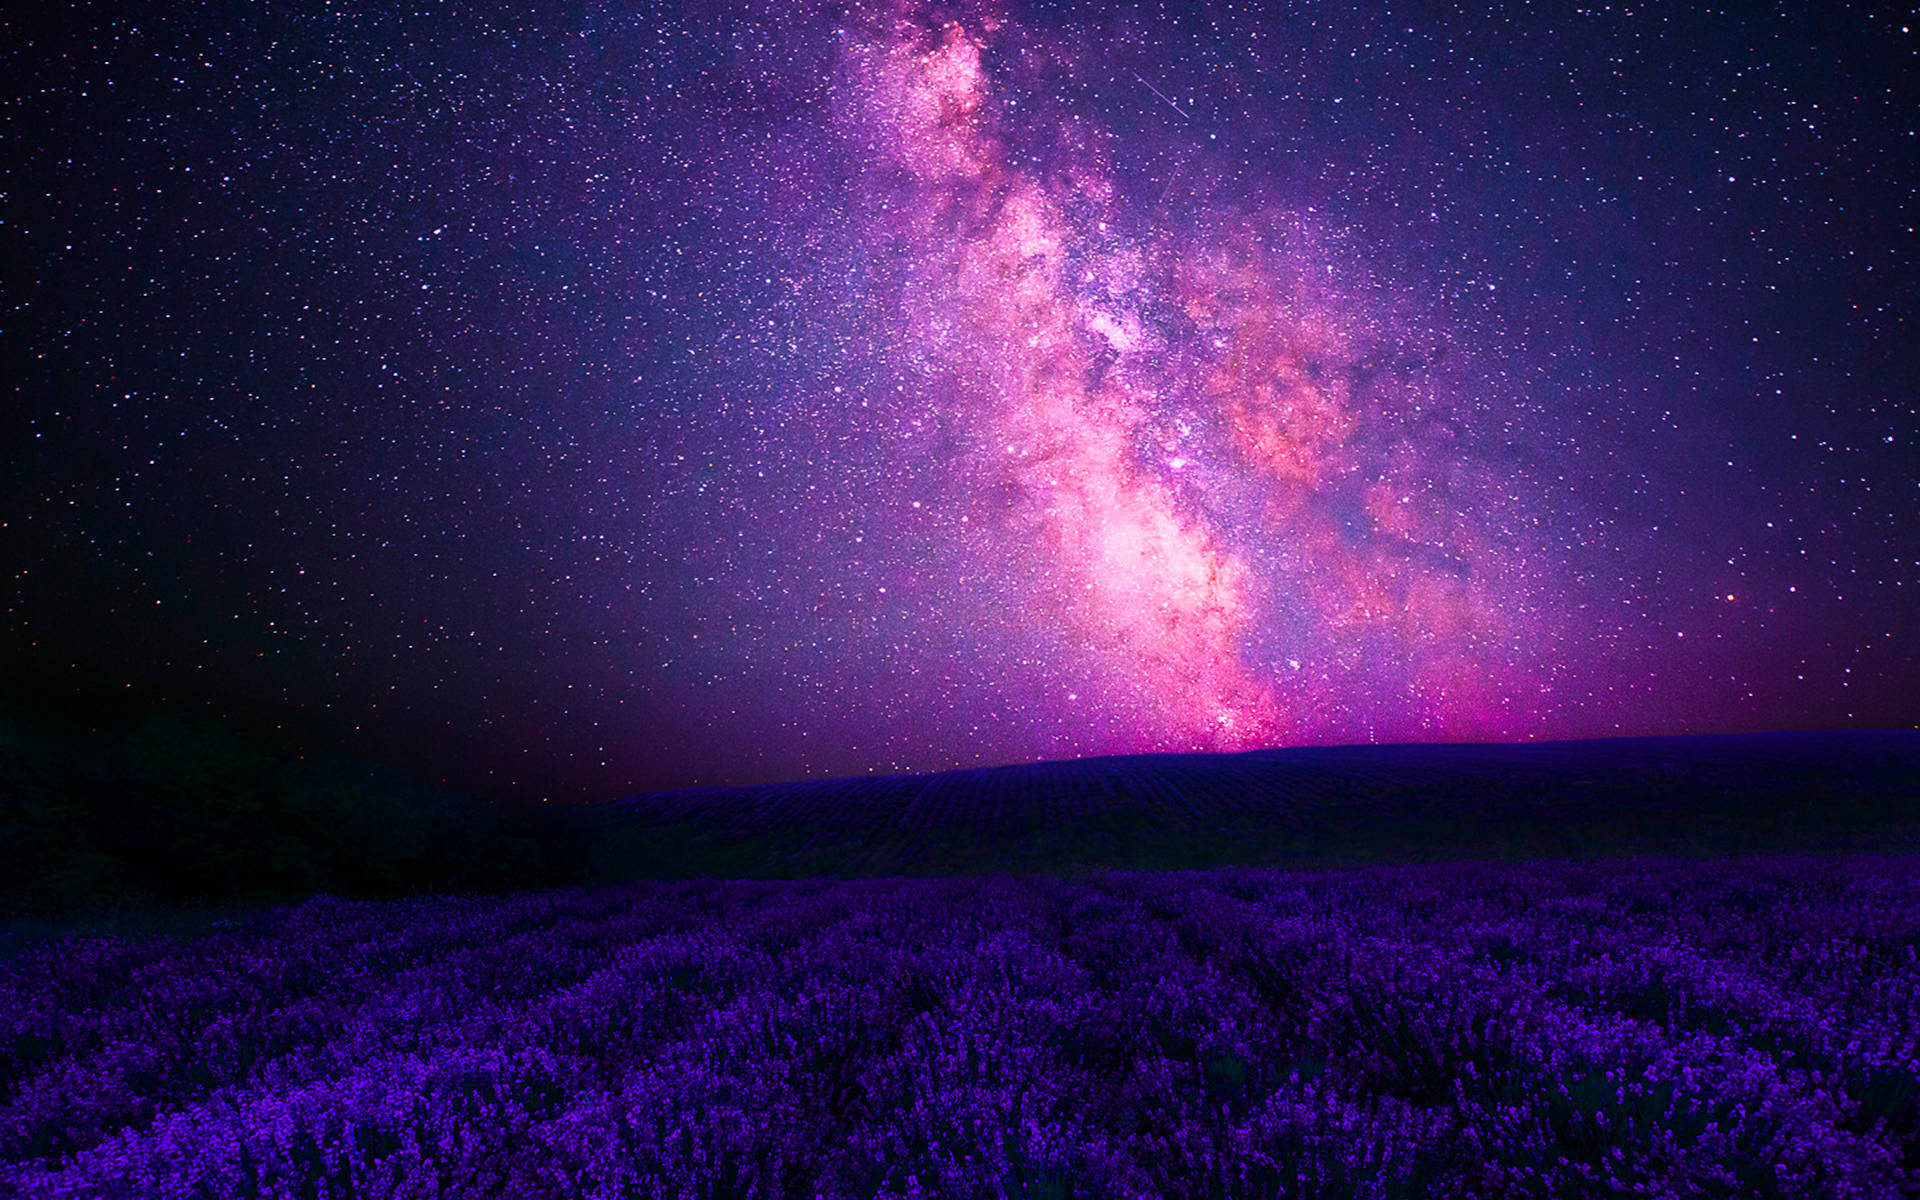 Pink Galaxy Over The Country